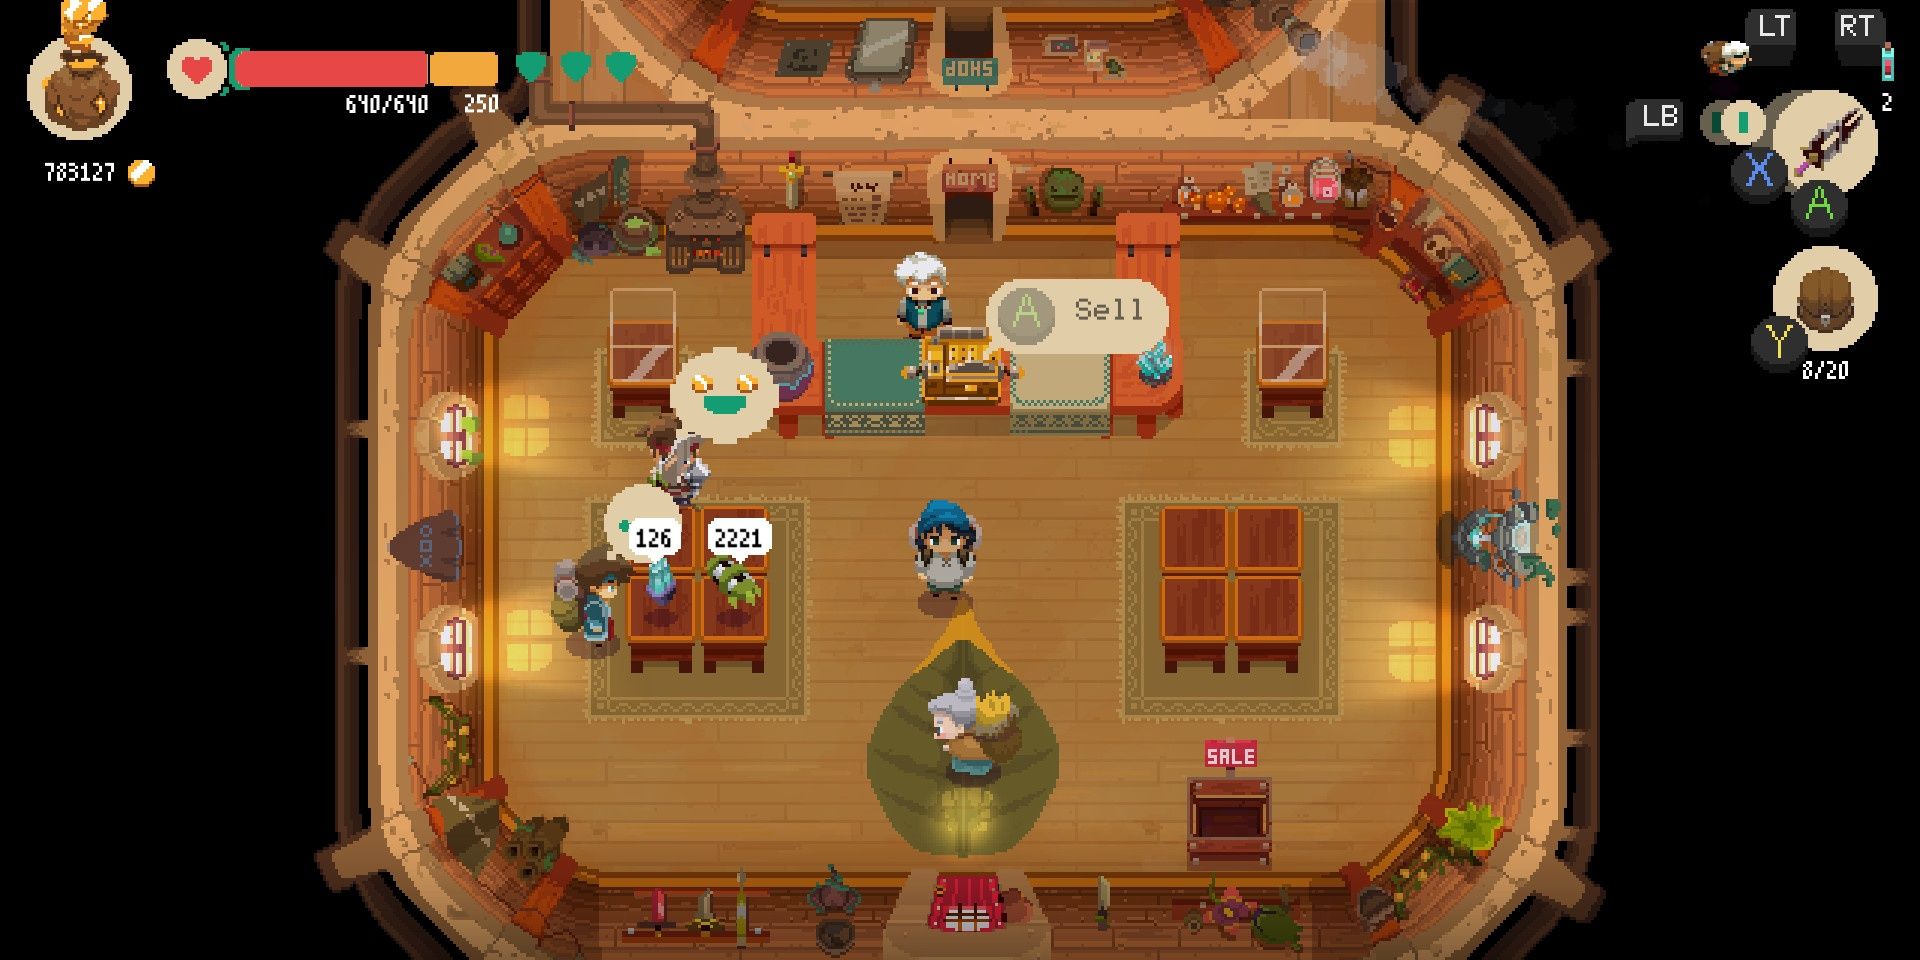 A screenshot showing the shop in Moonlighter